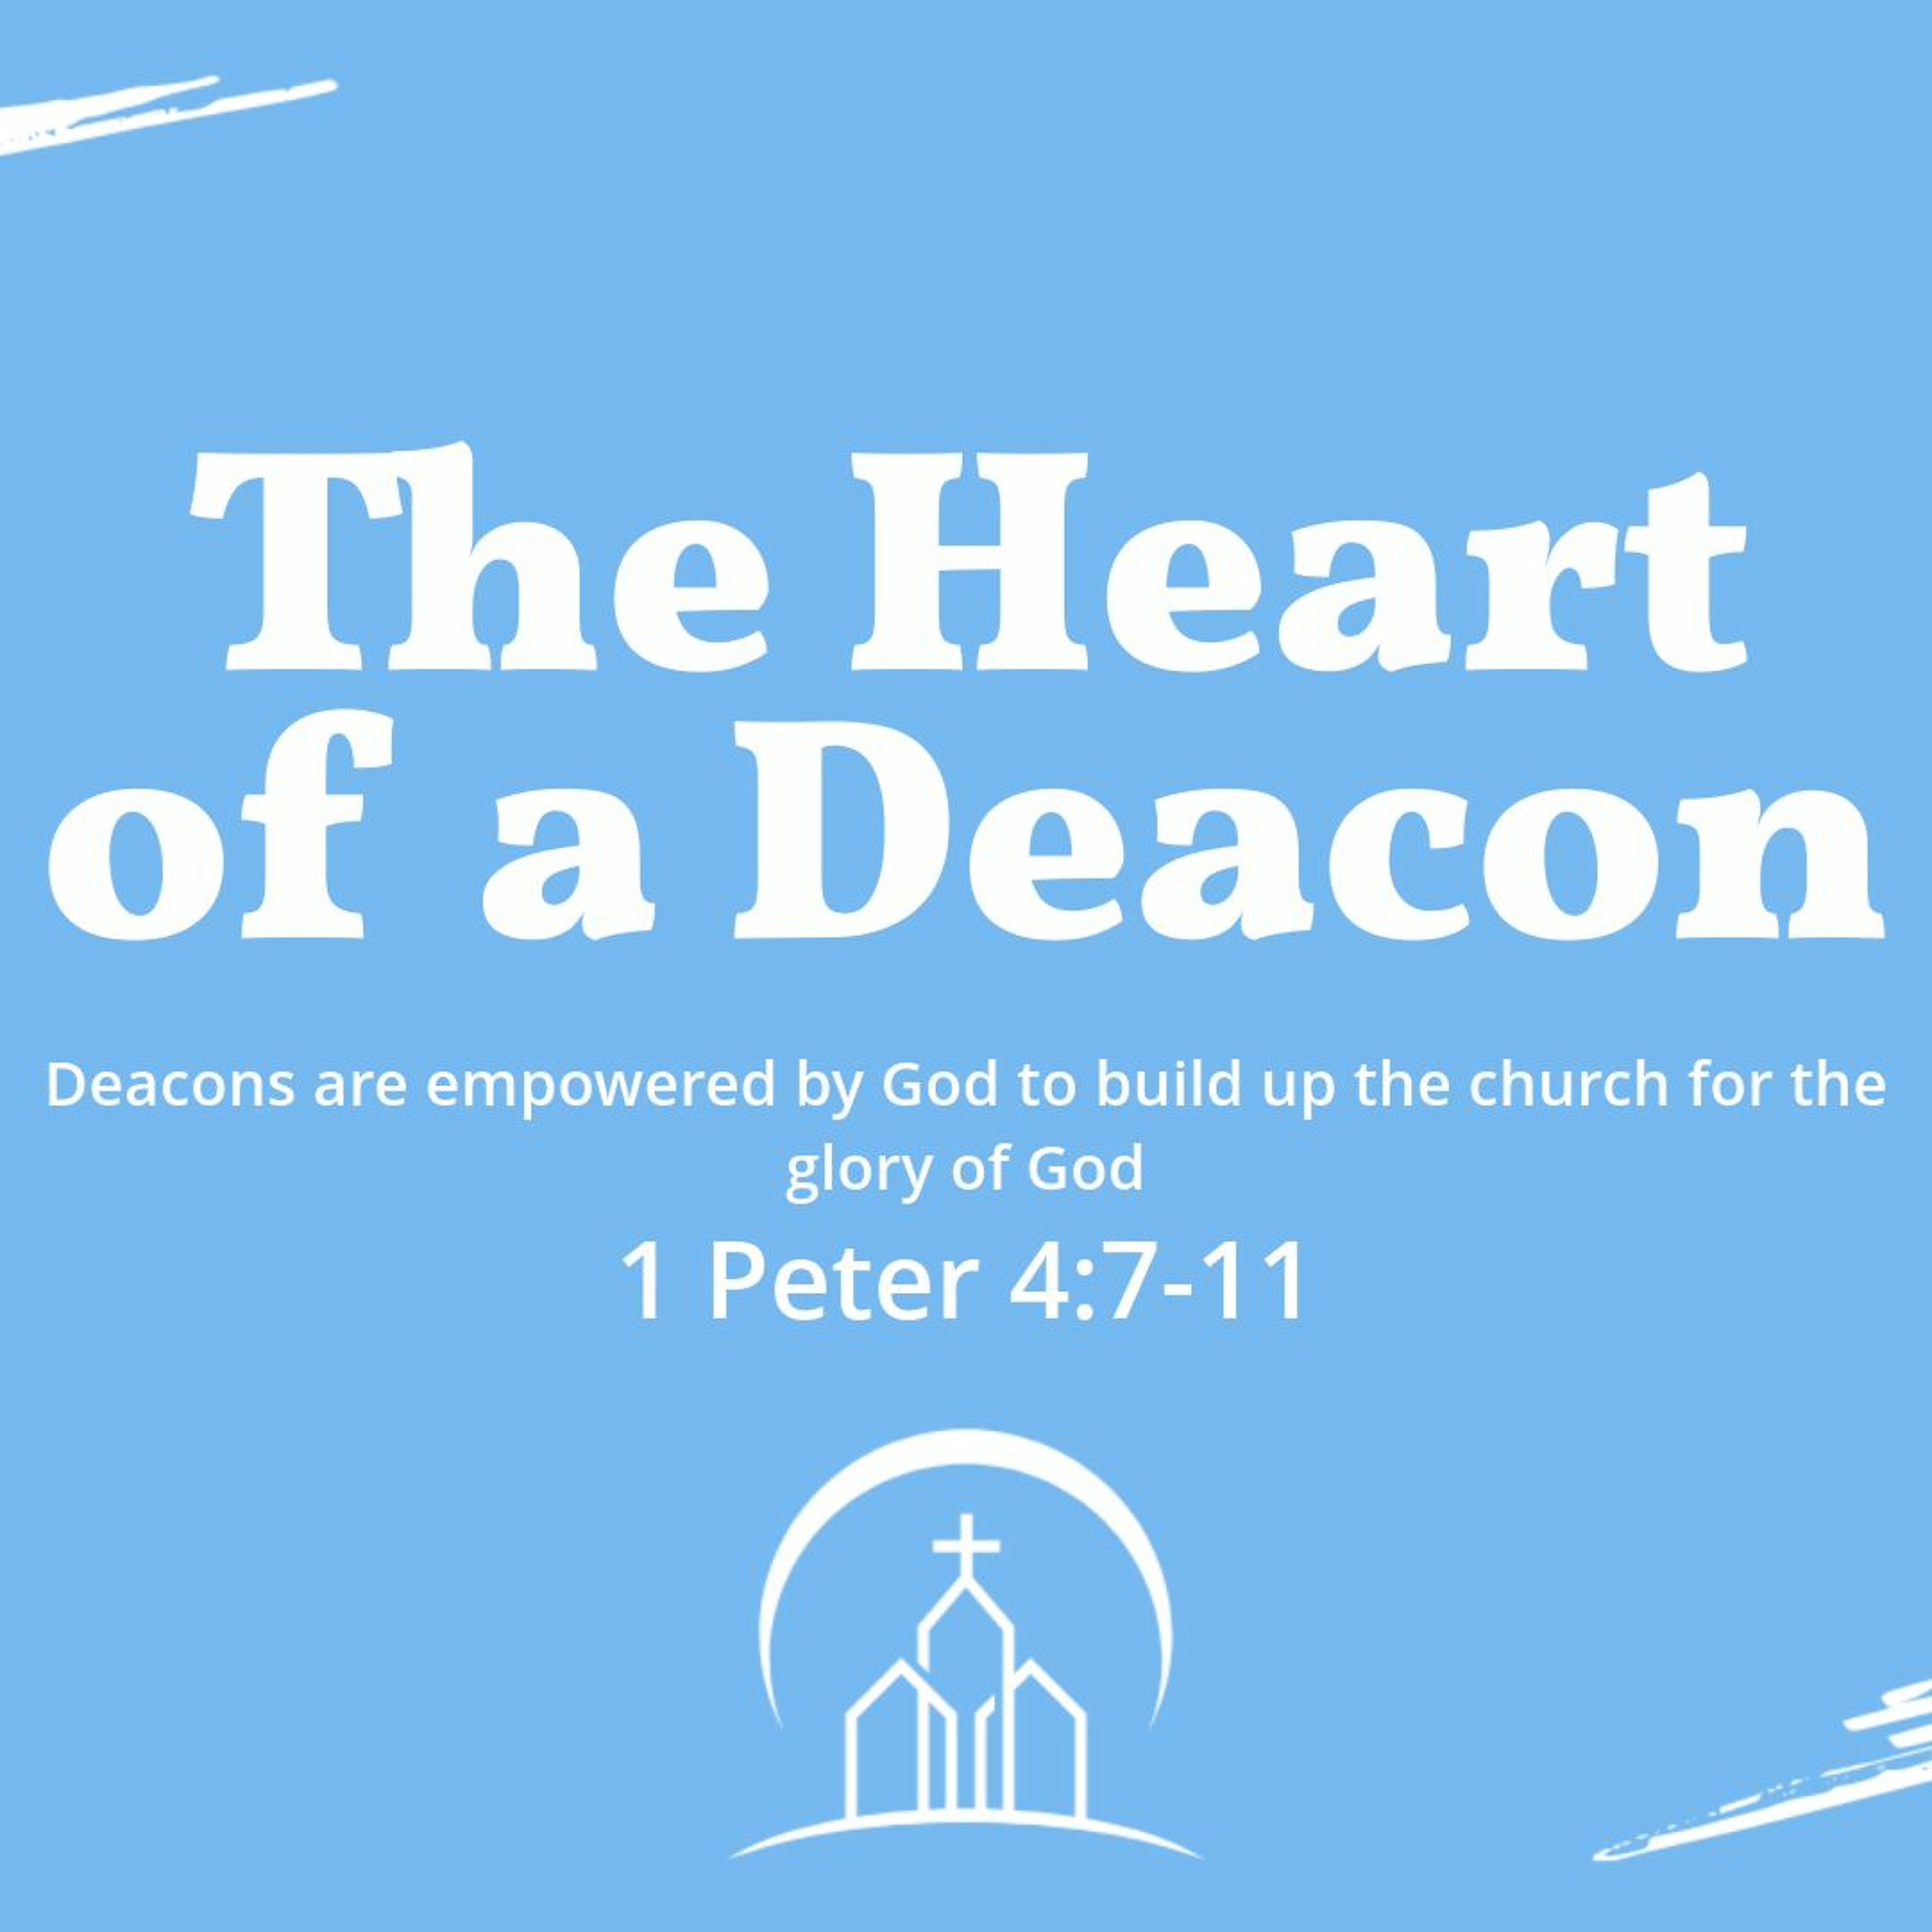 The Heart of a Deacon (1 Peter 4:7-11)